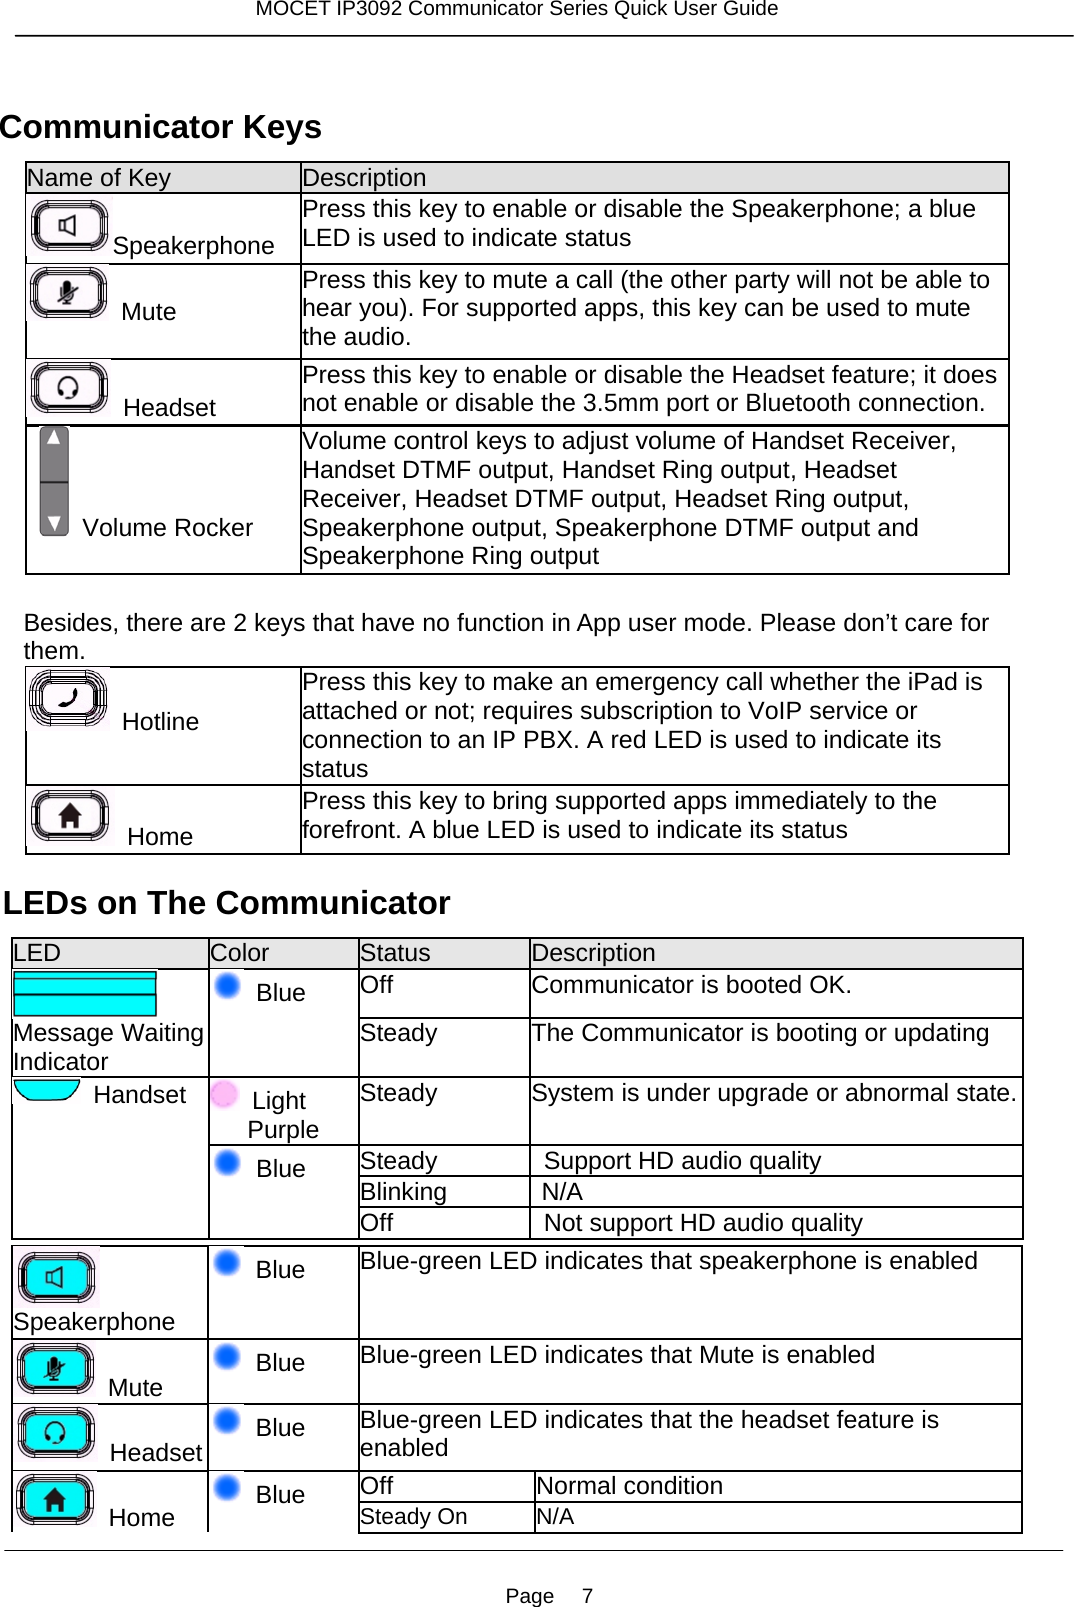 Page   7 MOCET IP3092 Communicator Series Quick User Guide   Communicator Keys   Name of Key  Description  Speakerphone Press this key to enable or disable the Speakerphone; a blue LED is used to indicate status  Mute Press this key to mute a call (the other party will not be able to hear you). For supported apps, this key can be used to mute the audio.  Headset Press this key to enable or disable the Headset feature; it does not enable or disable the 3.5mm port or Bluetooth connection.  Volume Rocker Volume control keys to adjust volume of Handset Receiver, Handset DTMF output, Handset Ring output, Headset Receiver, Headset DTMF output, Headset Ring output, Speakerphone output, Speakerphone DTMF output and Speakerphone Ring output   Besides, there are 2 keys that have no function in App user mode. Please don’t care for   them.  Hotline Press this key to make an emergency call whether the iPad is attached or not; requires subscription to VoIP service or connection to an IP PBX. A red LED is used to indicate its status  Home Press this key to bring supported apps immediately to the forefront. A blue LED is used to indicate its status  LEDs on The Communicator  LED  Color  Status  Description Off  Communicator is booted OK.    Message Waiting Indicator   Blue Steady   The Communicator is booting or updating    Light Purple Steady   System is under upgrade or abnormal state.Steady    Support HD audio quality   Blinking   N/A  Handset  Blue Off   Not support HD audio quality     Speakerphone  Blue   Blue-green LED indicates that speakerphone is enabled  Mute   Blue   Blue-green LED indicates that Mute is enabled  Headset   Blue  Blue-green LED indicates that the headset feature is enabled Off  Normal condition  Home   Blue  Steady On N/A 